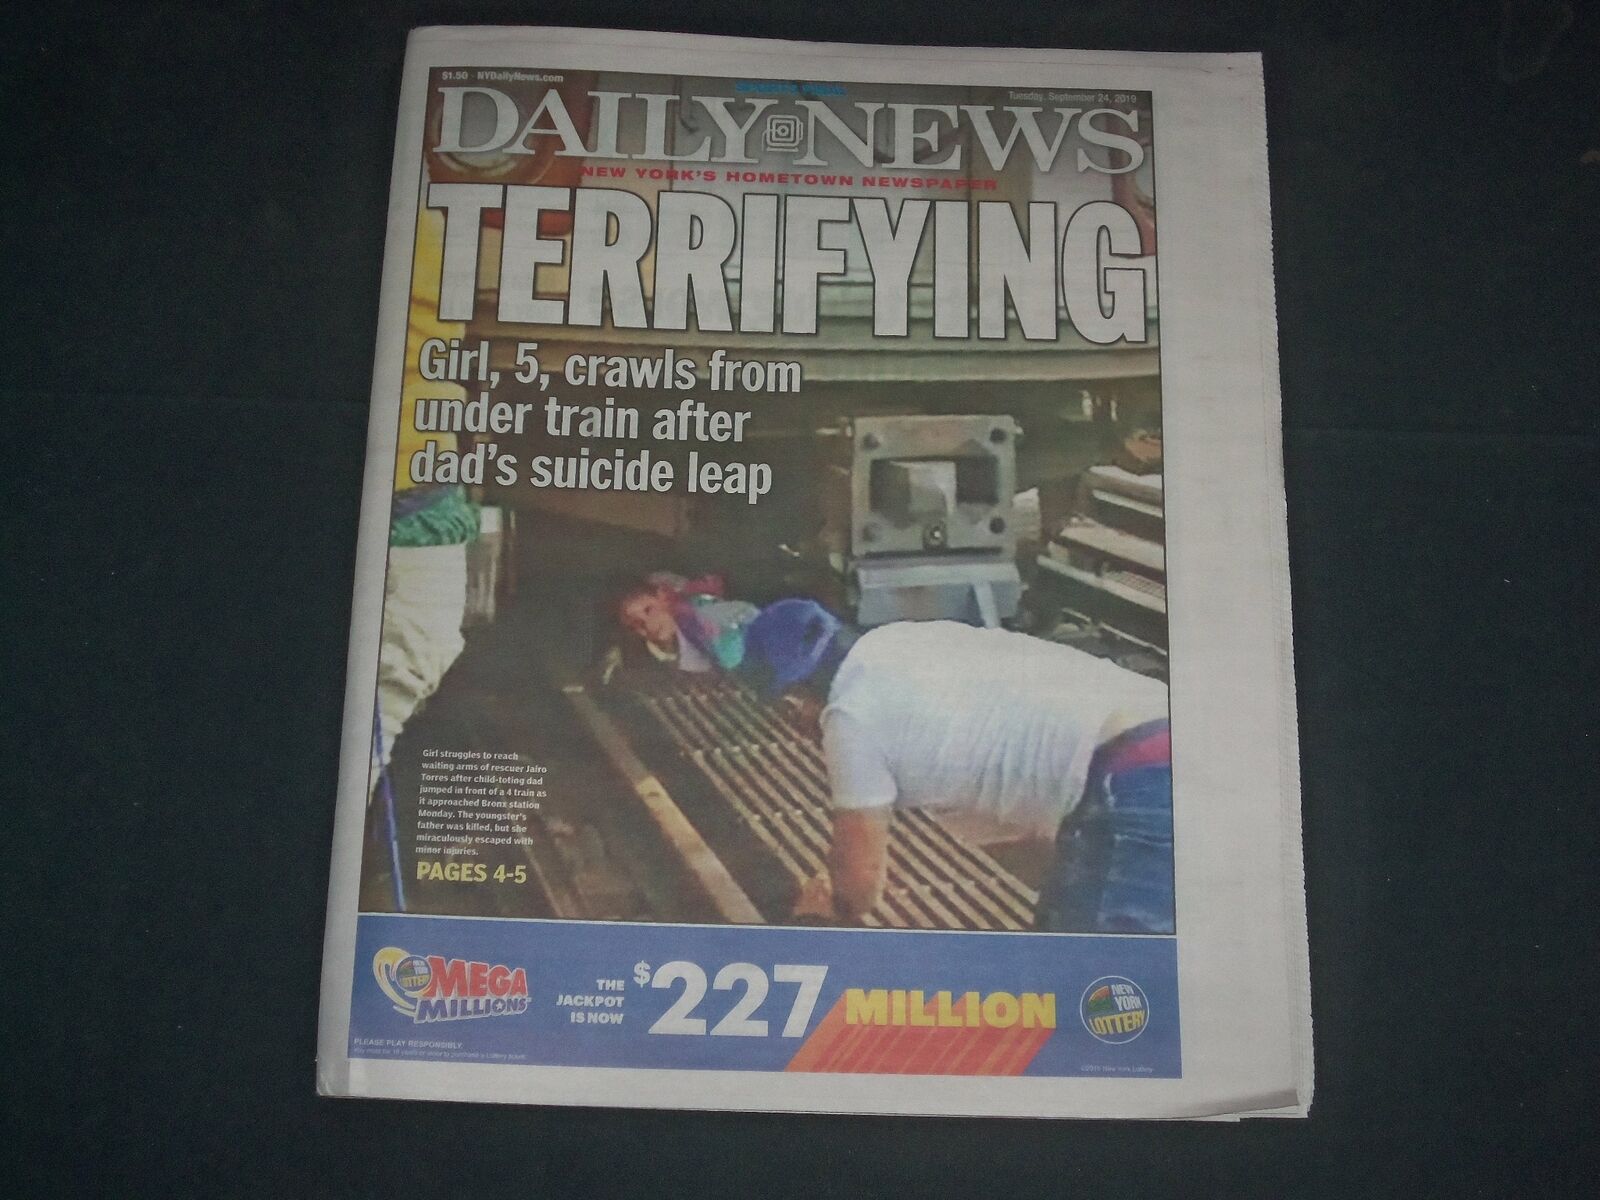 2019 SEP 24 NEW YORK DAILY NEWS NEWSPAPER - GIRL, 5 SURVIES DAD'S SUICIDE LEAP